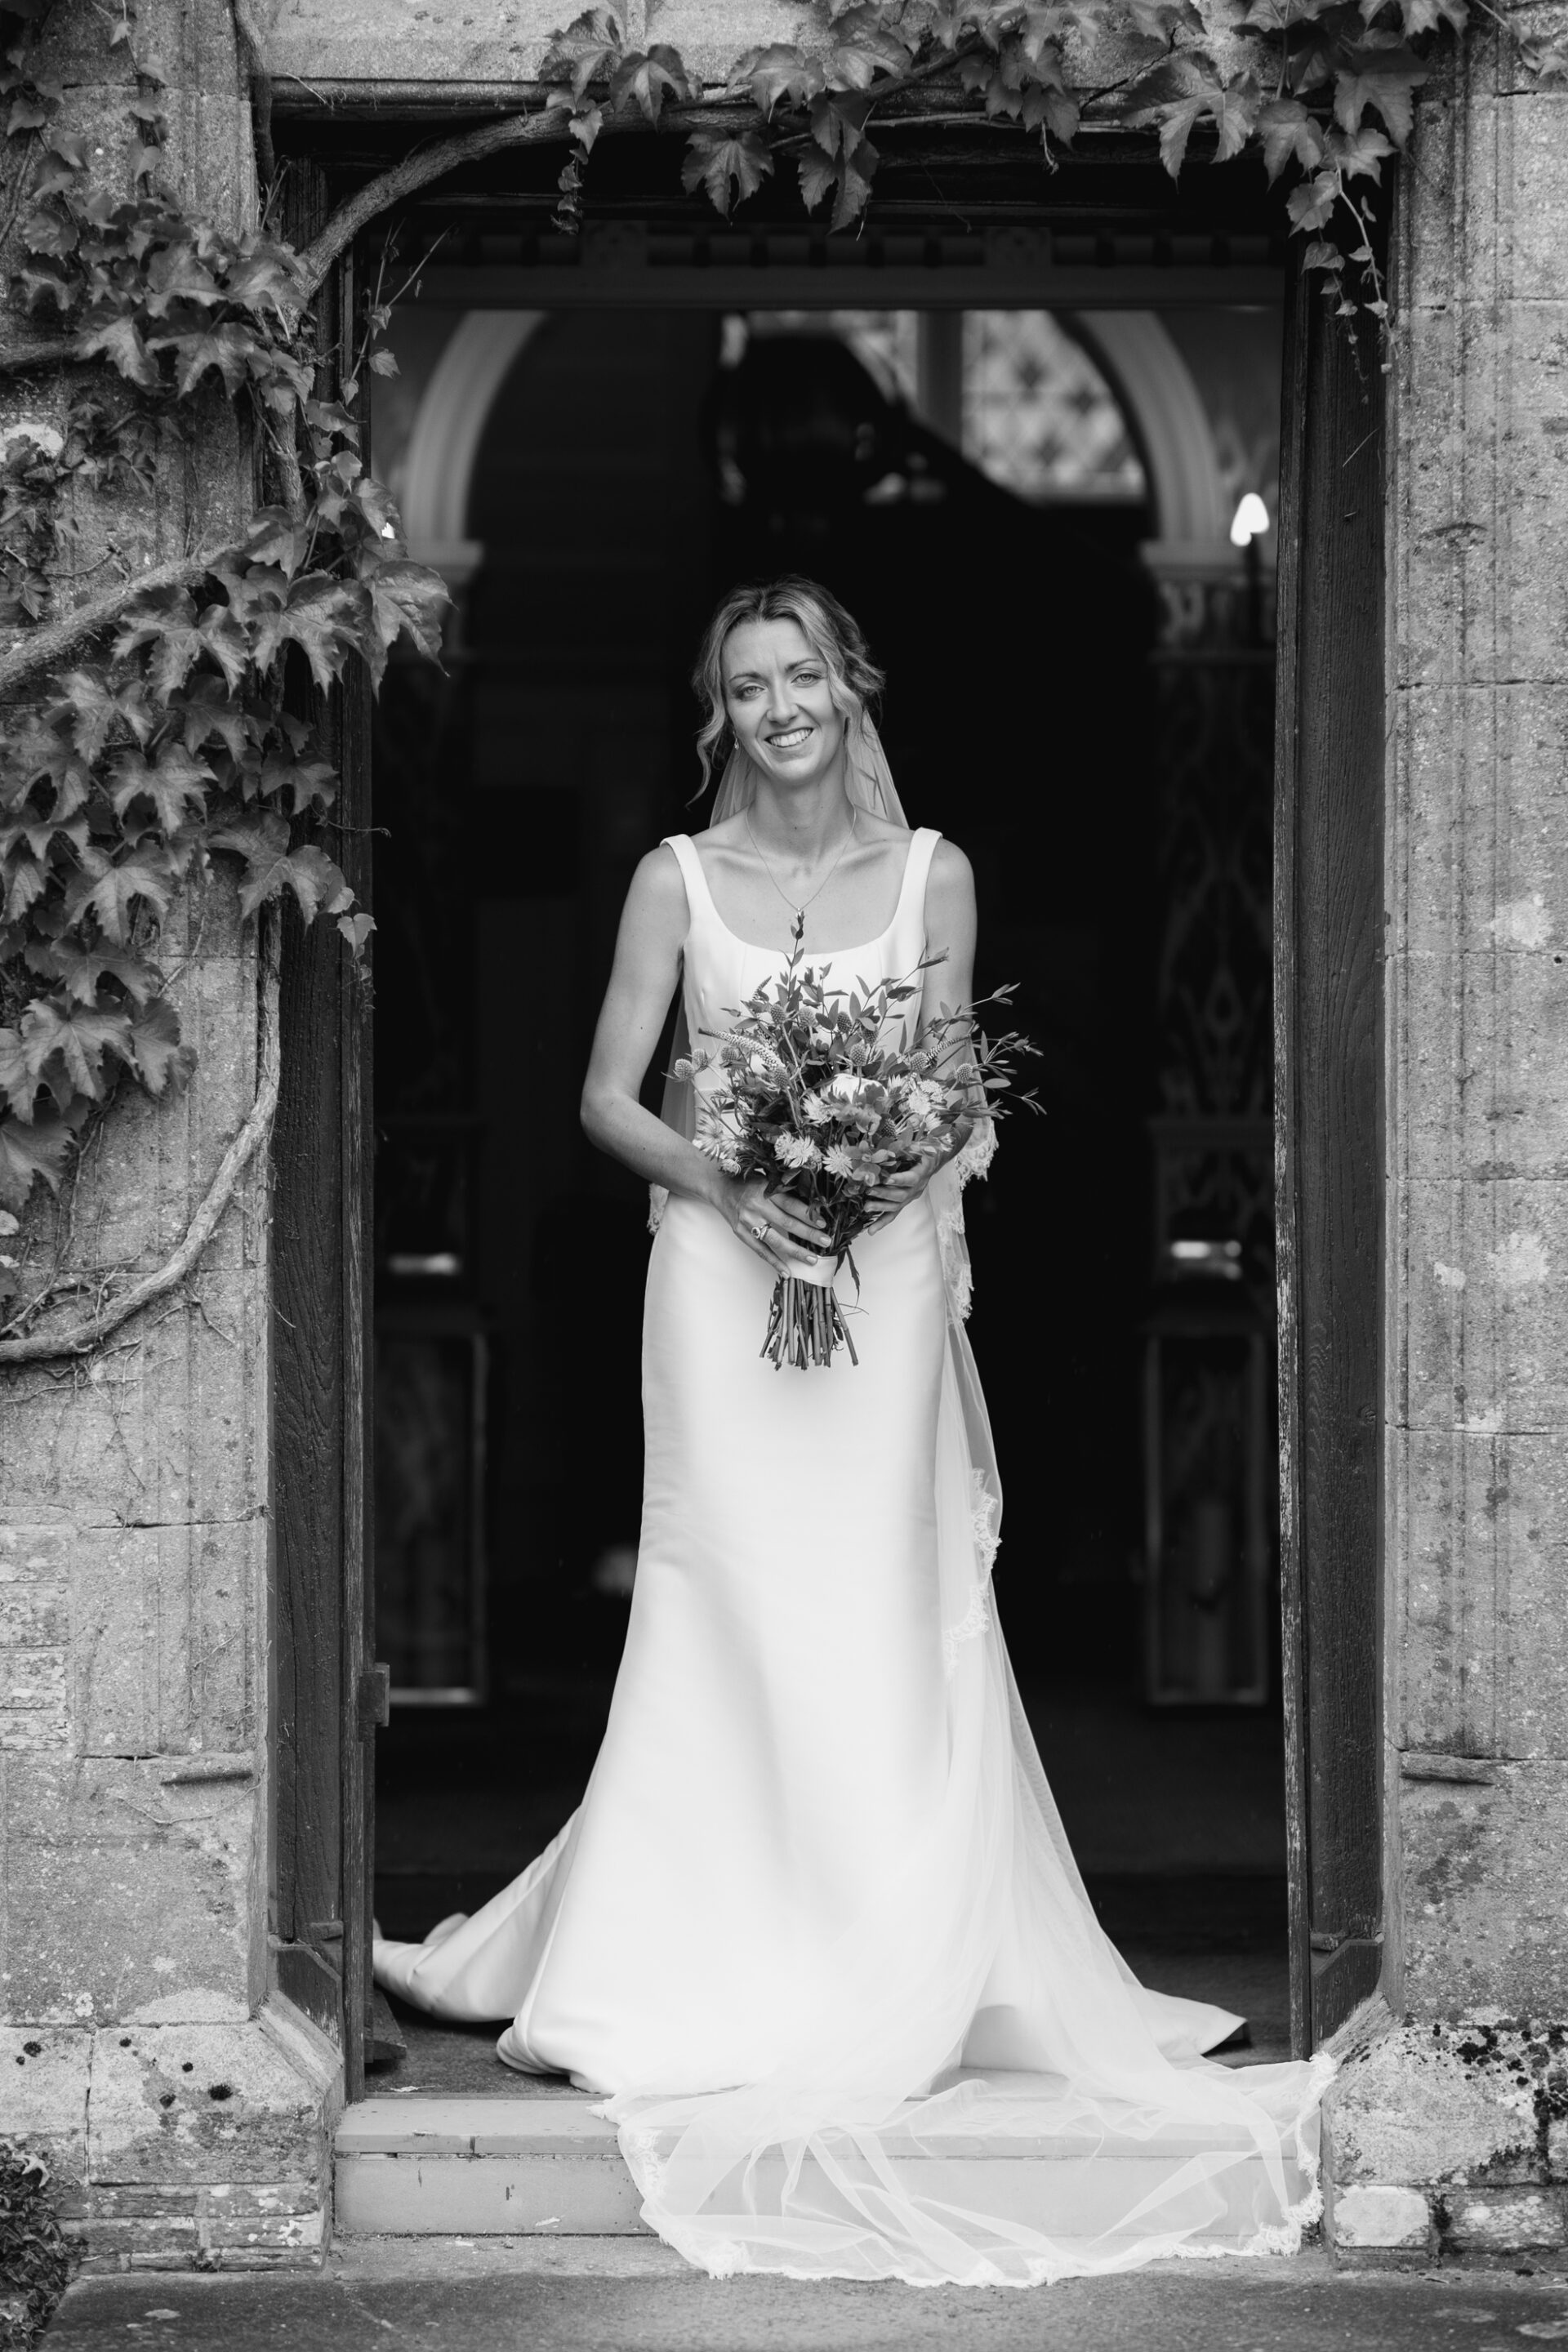 The bride stops for a portrait in the doorway of the family home